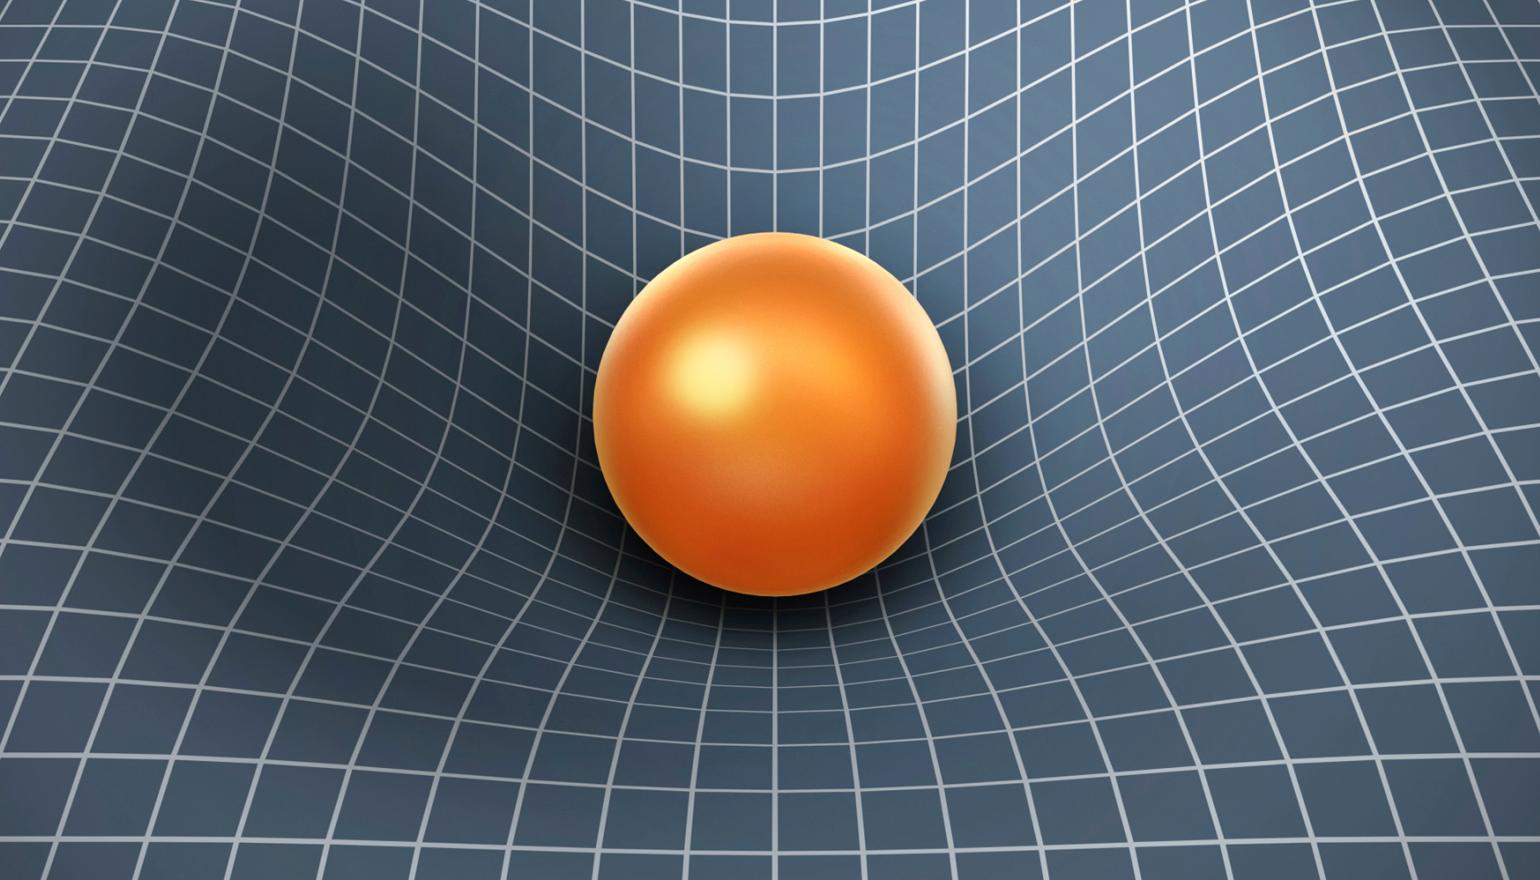 Ball weighing down on grid